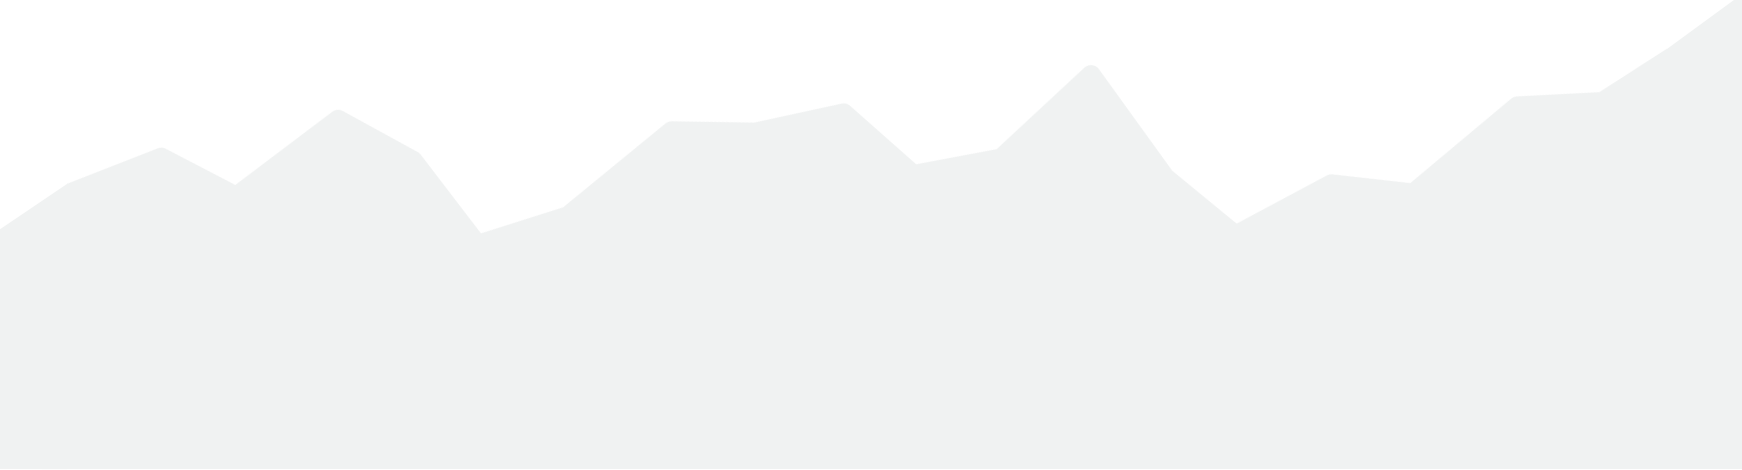 mountain png image